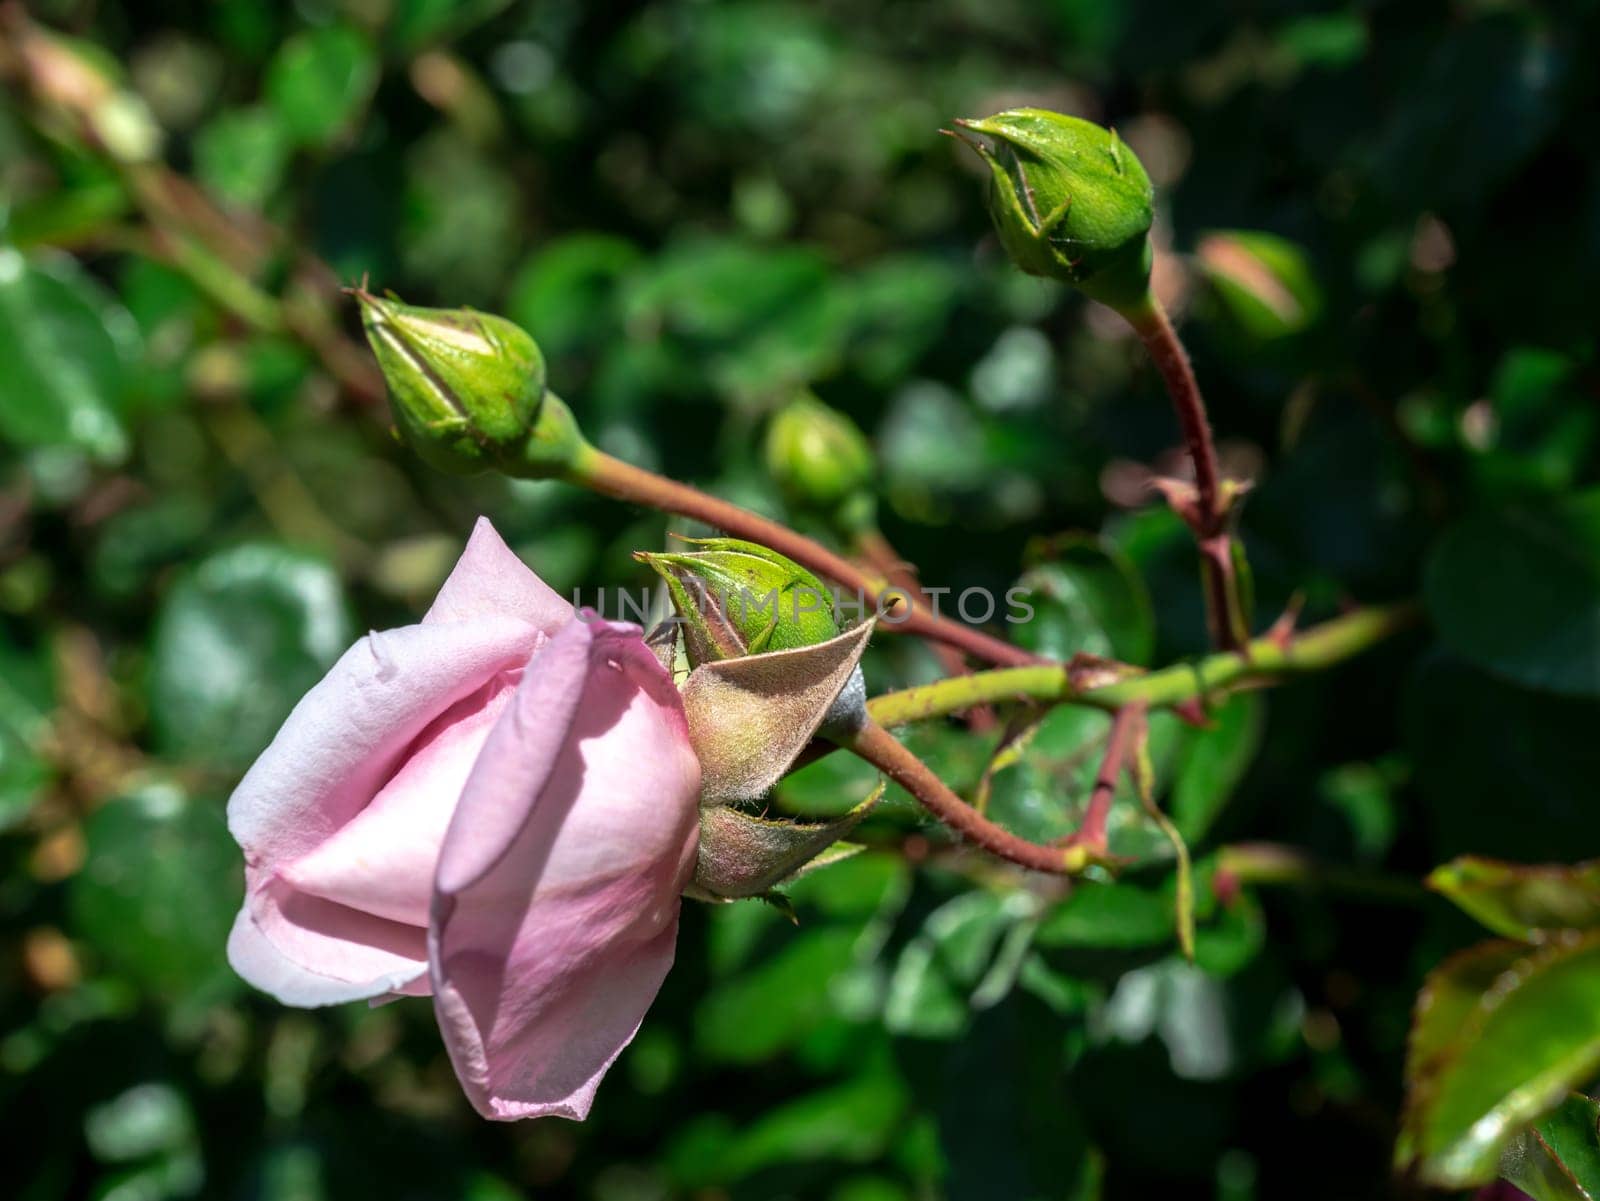 Blooming pink rose on a green leaves background by Multipedia